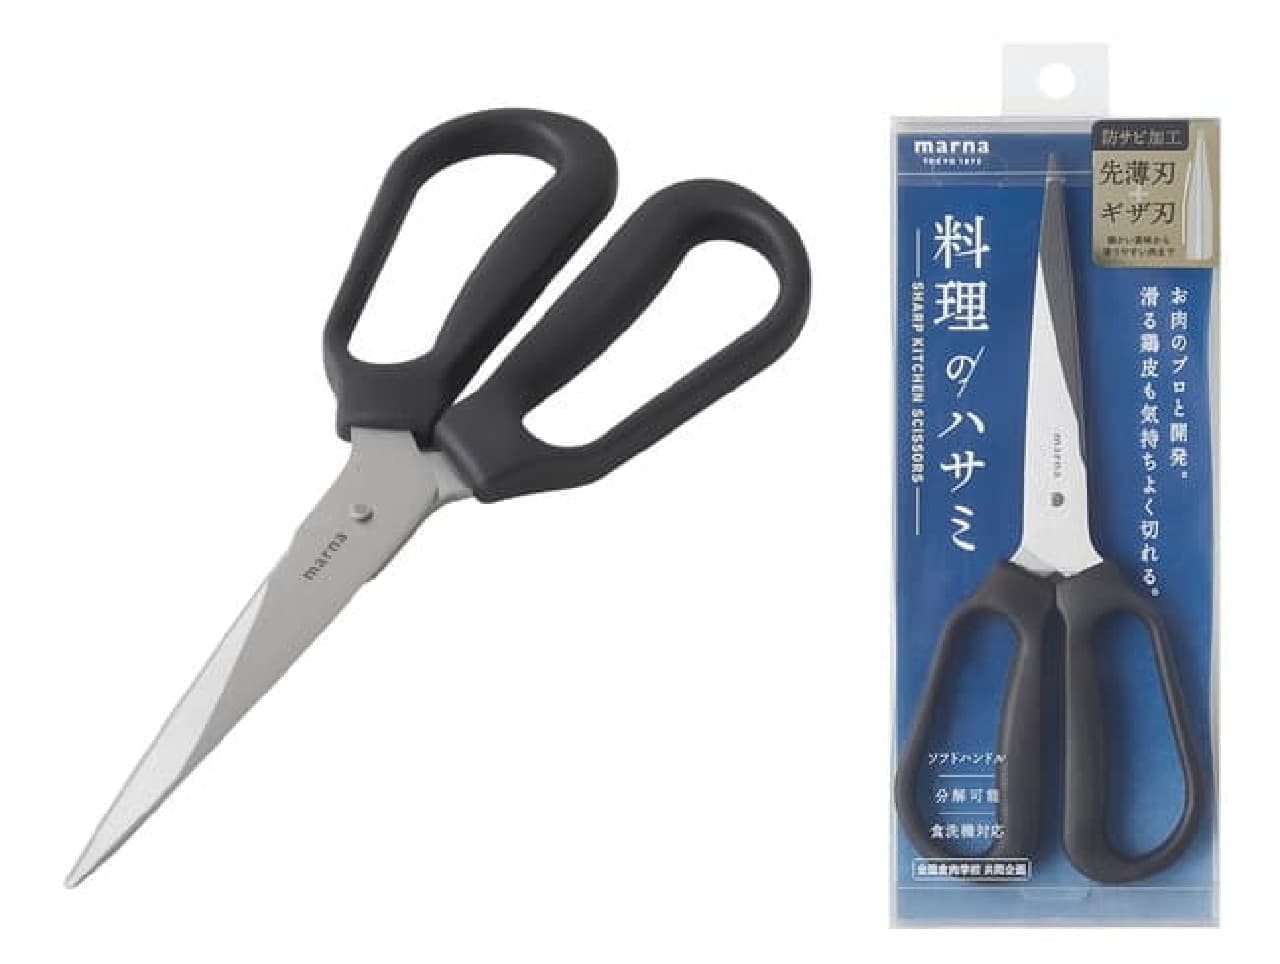 Cooking Scissors" from Marna -- Kitchen scissors developed with meat professionals Easy to cut food and easy to clean